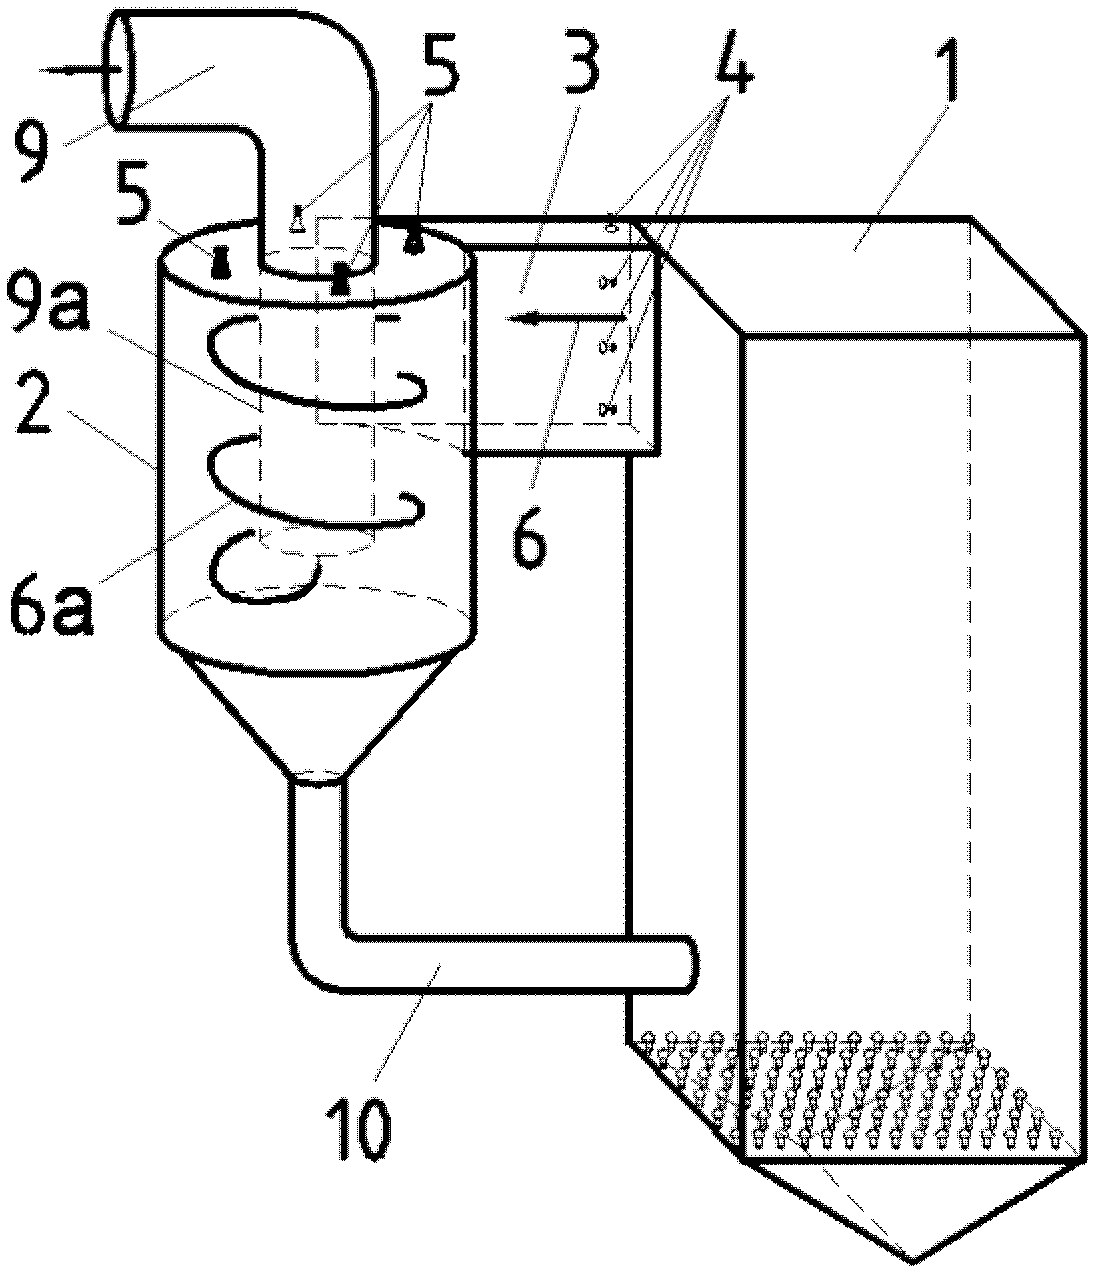 Efficient denitrifying device of circular fluidized bed boiler